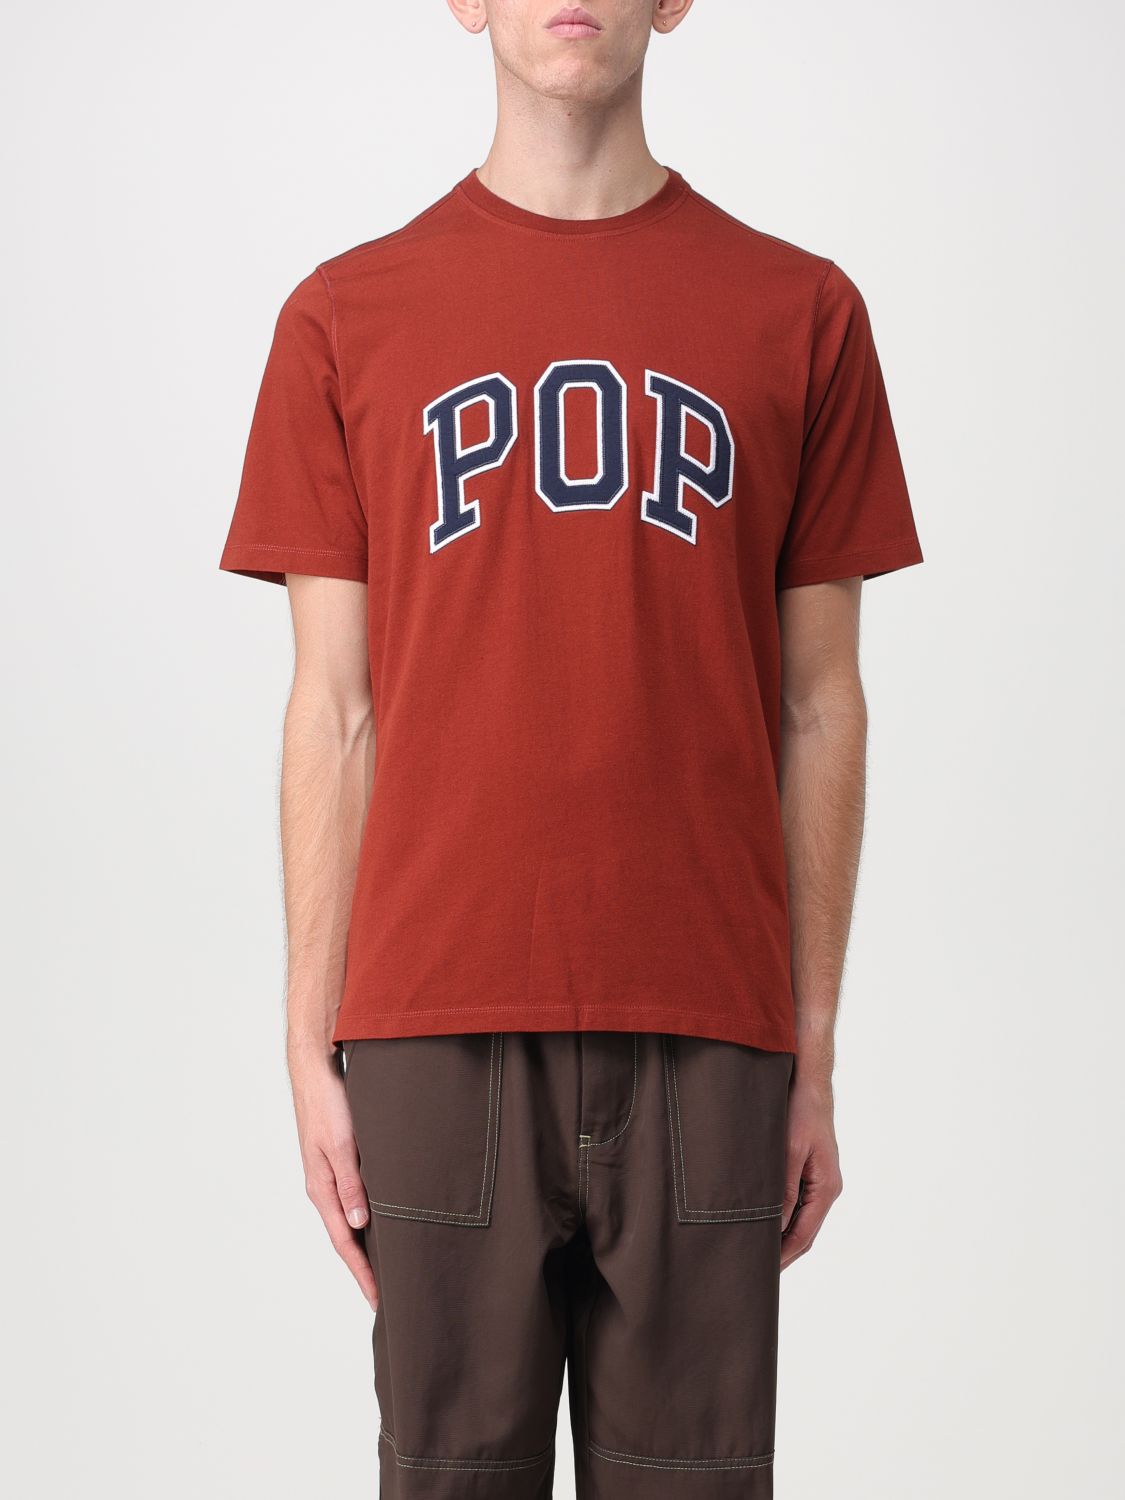 t-shirt pop trading company men colour red